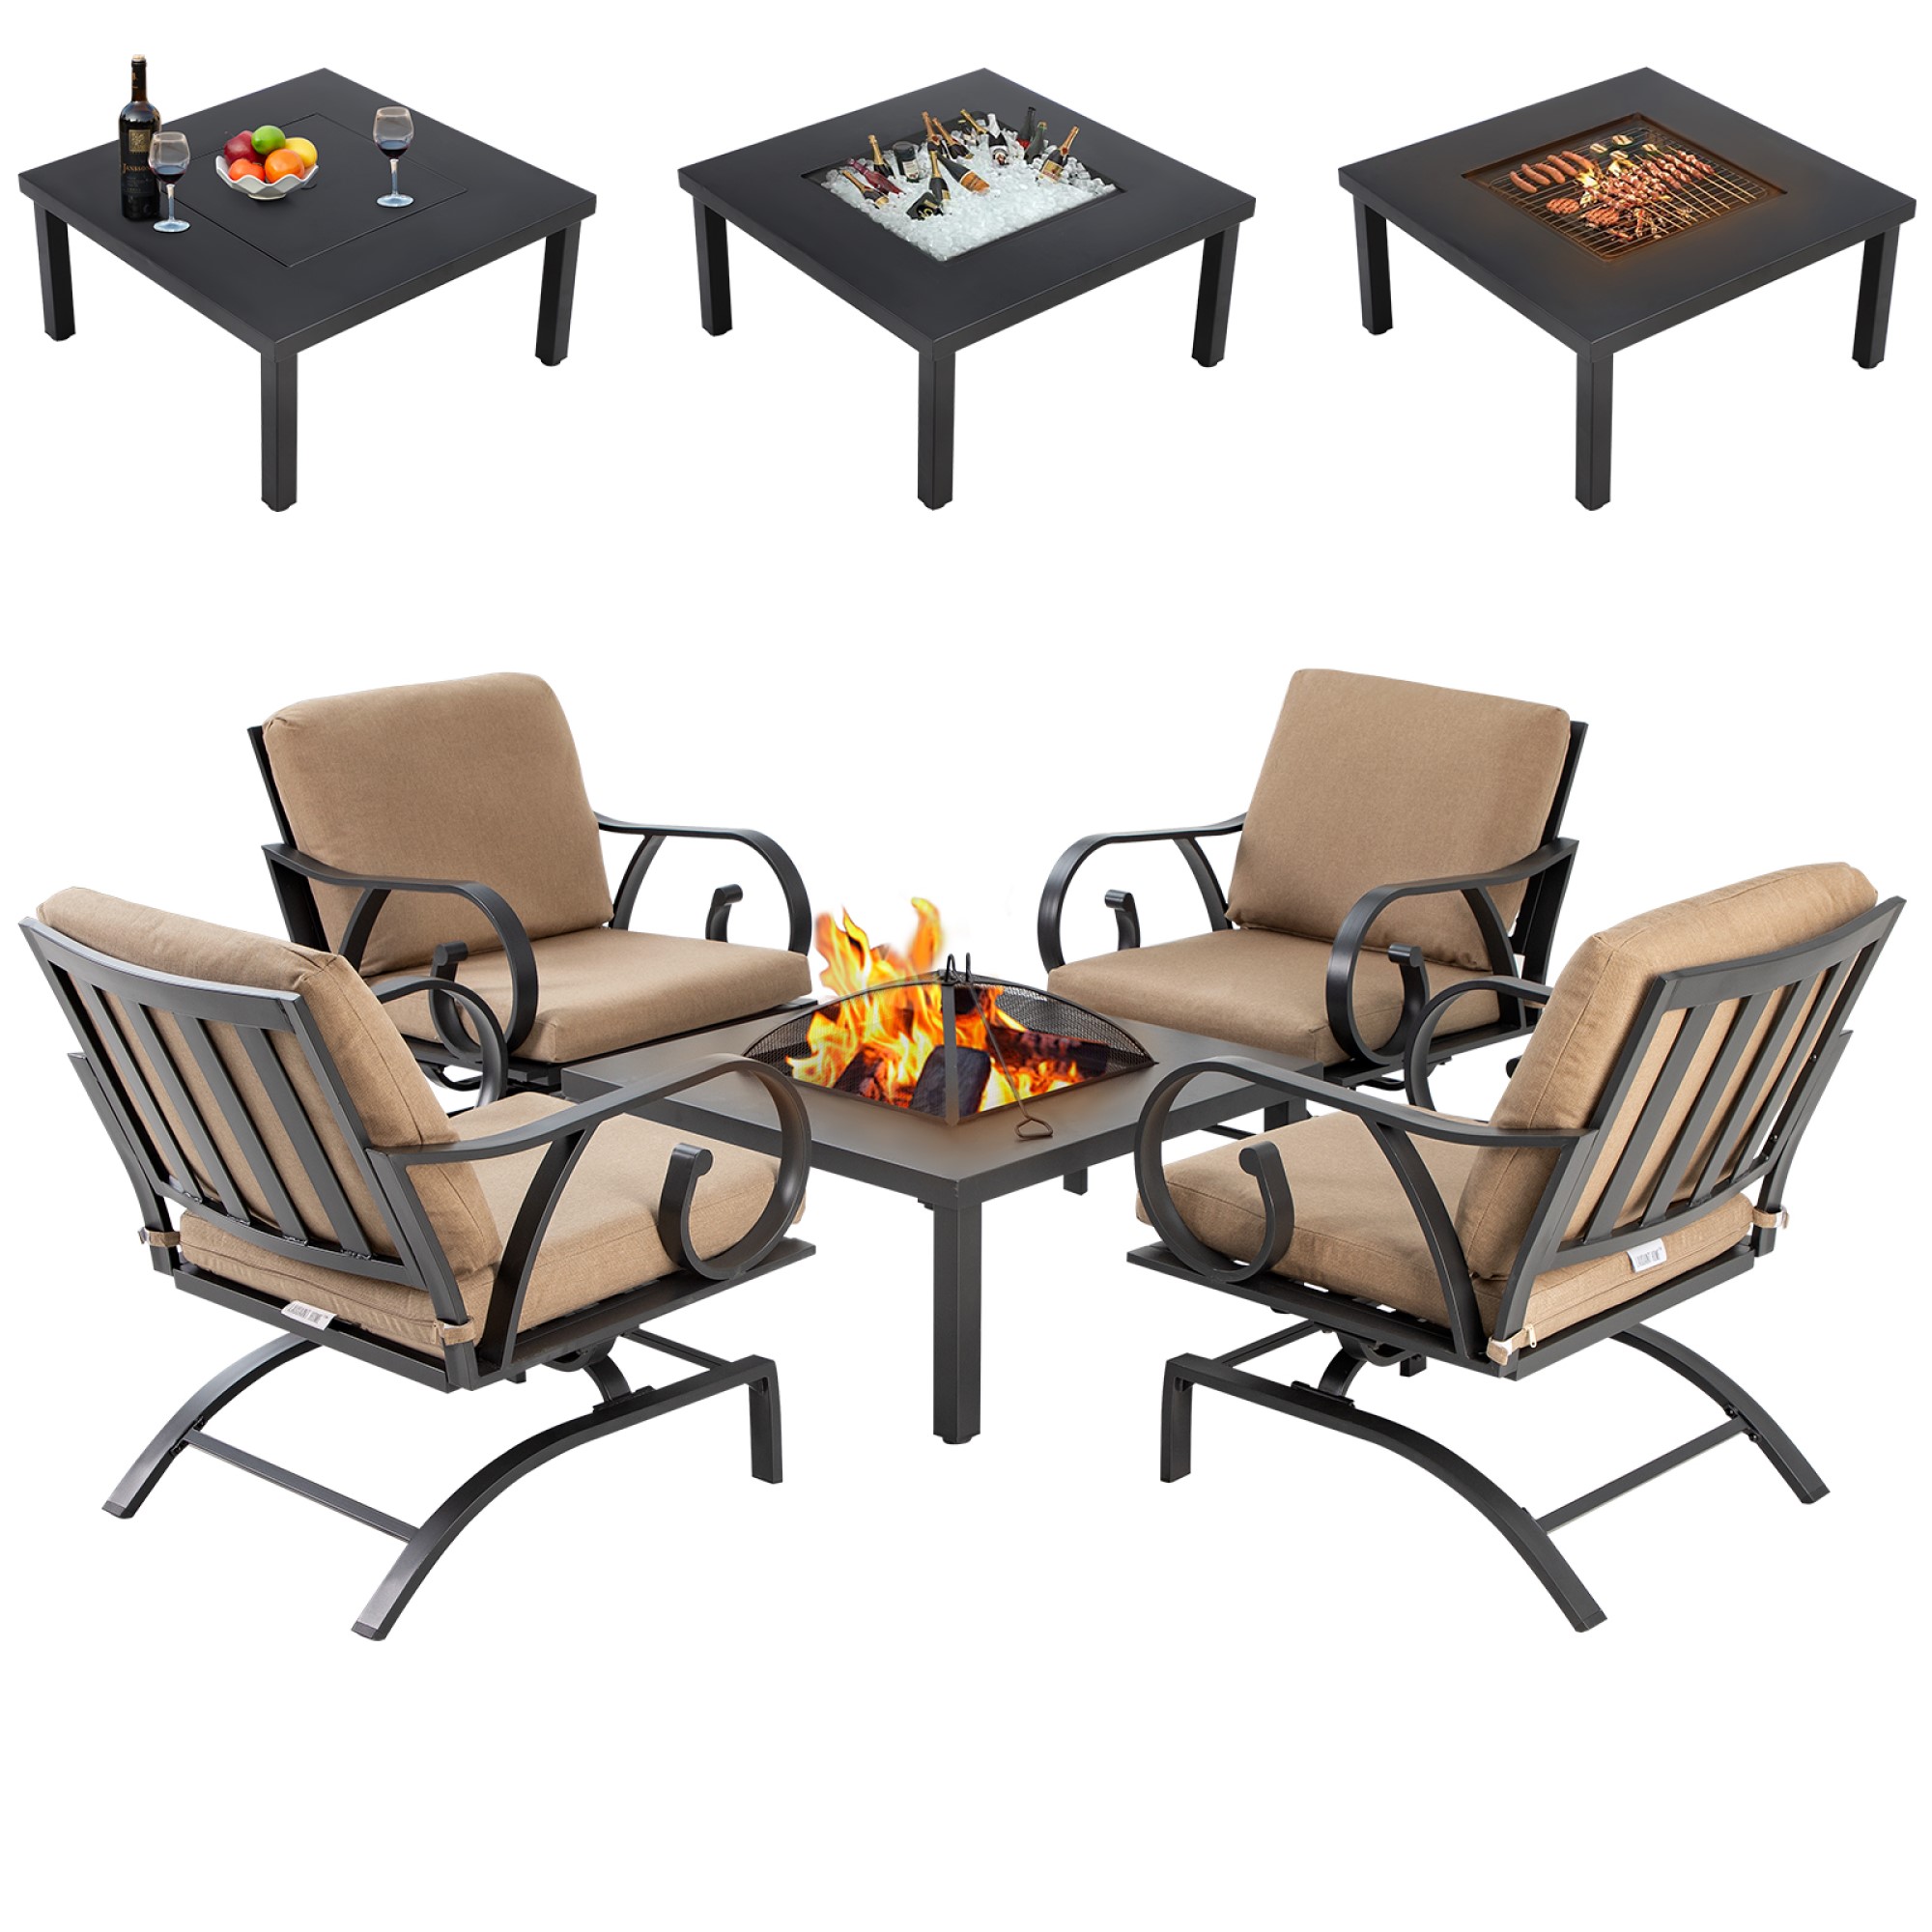 LAUSIANT Home 5 Piece Luxury Outdoor Furniture Conversation Set,Patio Rocking Chairs with Fire Table Pits,Bistro Sets for Balcony Yard Garden，Weight Capacity 350Lbs-Boyel Living